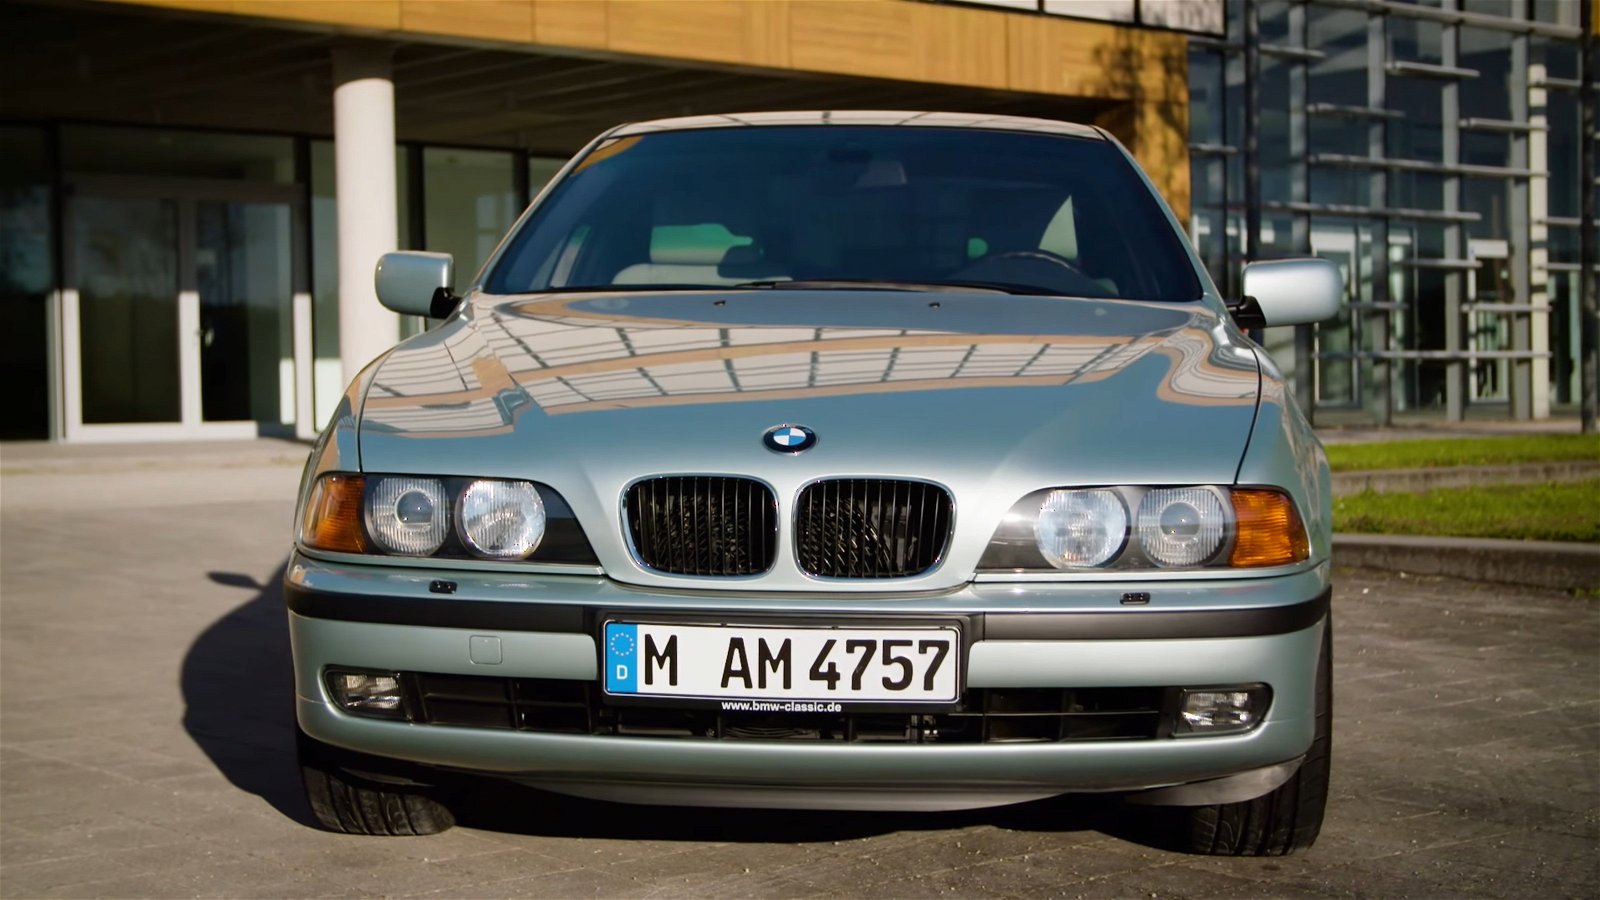 Video: The Bmw 5 Series E39 (1995-2004) Through The Years | Drivemag Cars